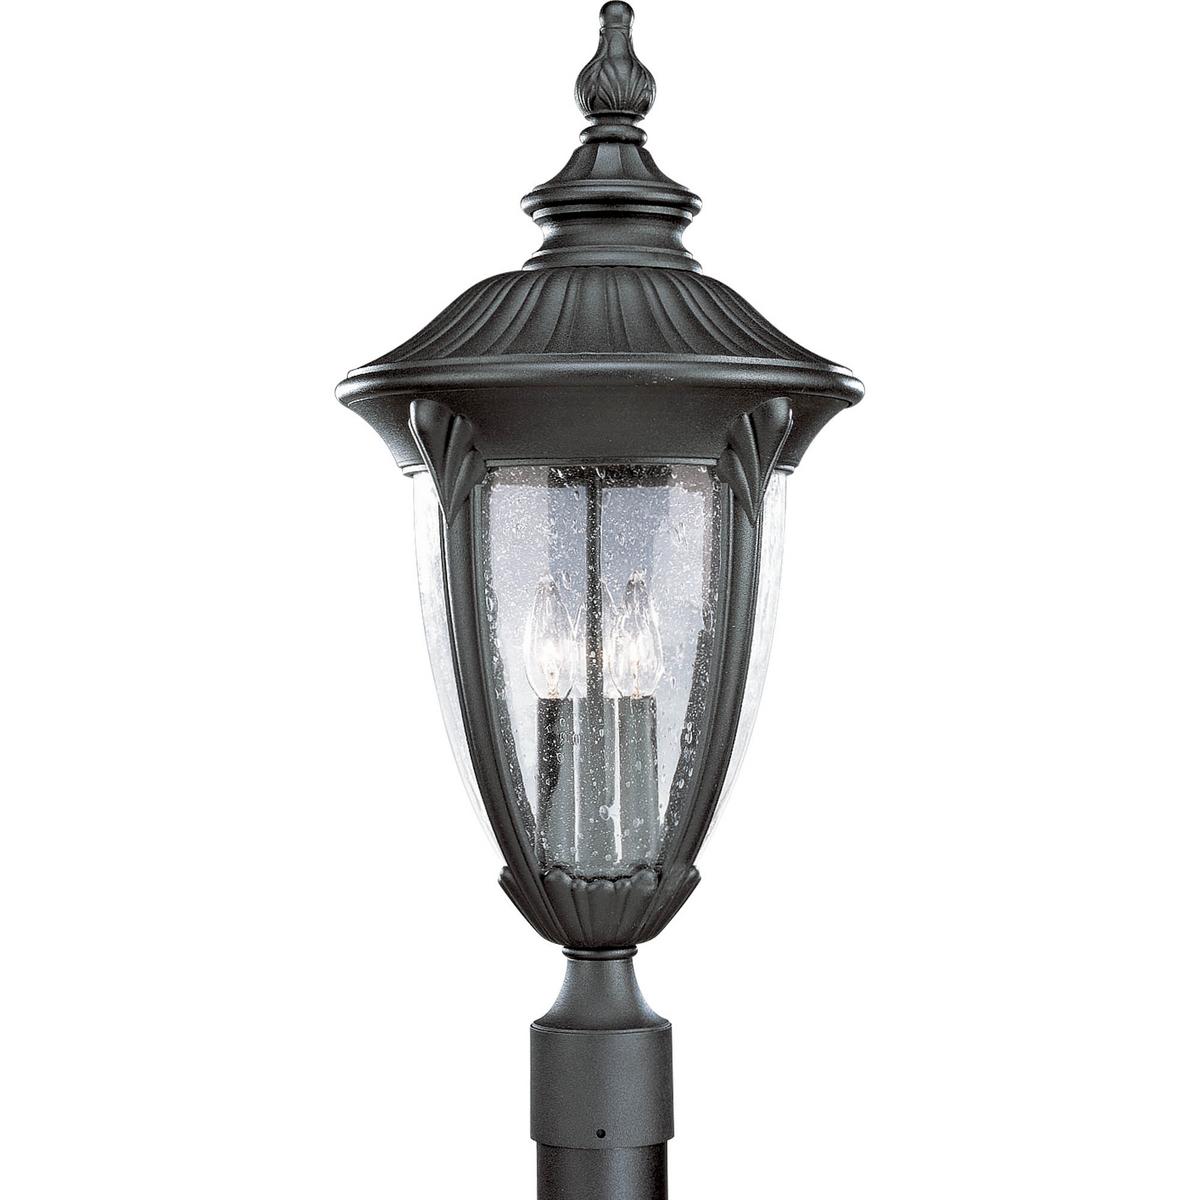 Hubbell P5420-31 Decorative shepherd hooks and acanthus cast arms and clear, seed glass urns. Cast aluminum post lantern with durable powder coat finish.  ; Decorative shepherd hooks and acanthus cast arms. ; Clear, seed glass urns. ; Cast aluminum with durable powder coa